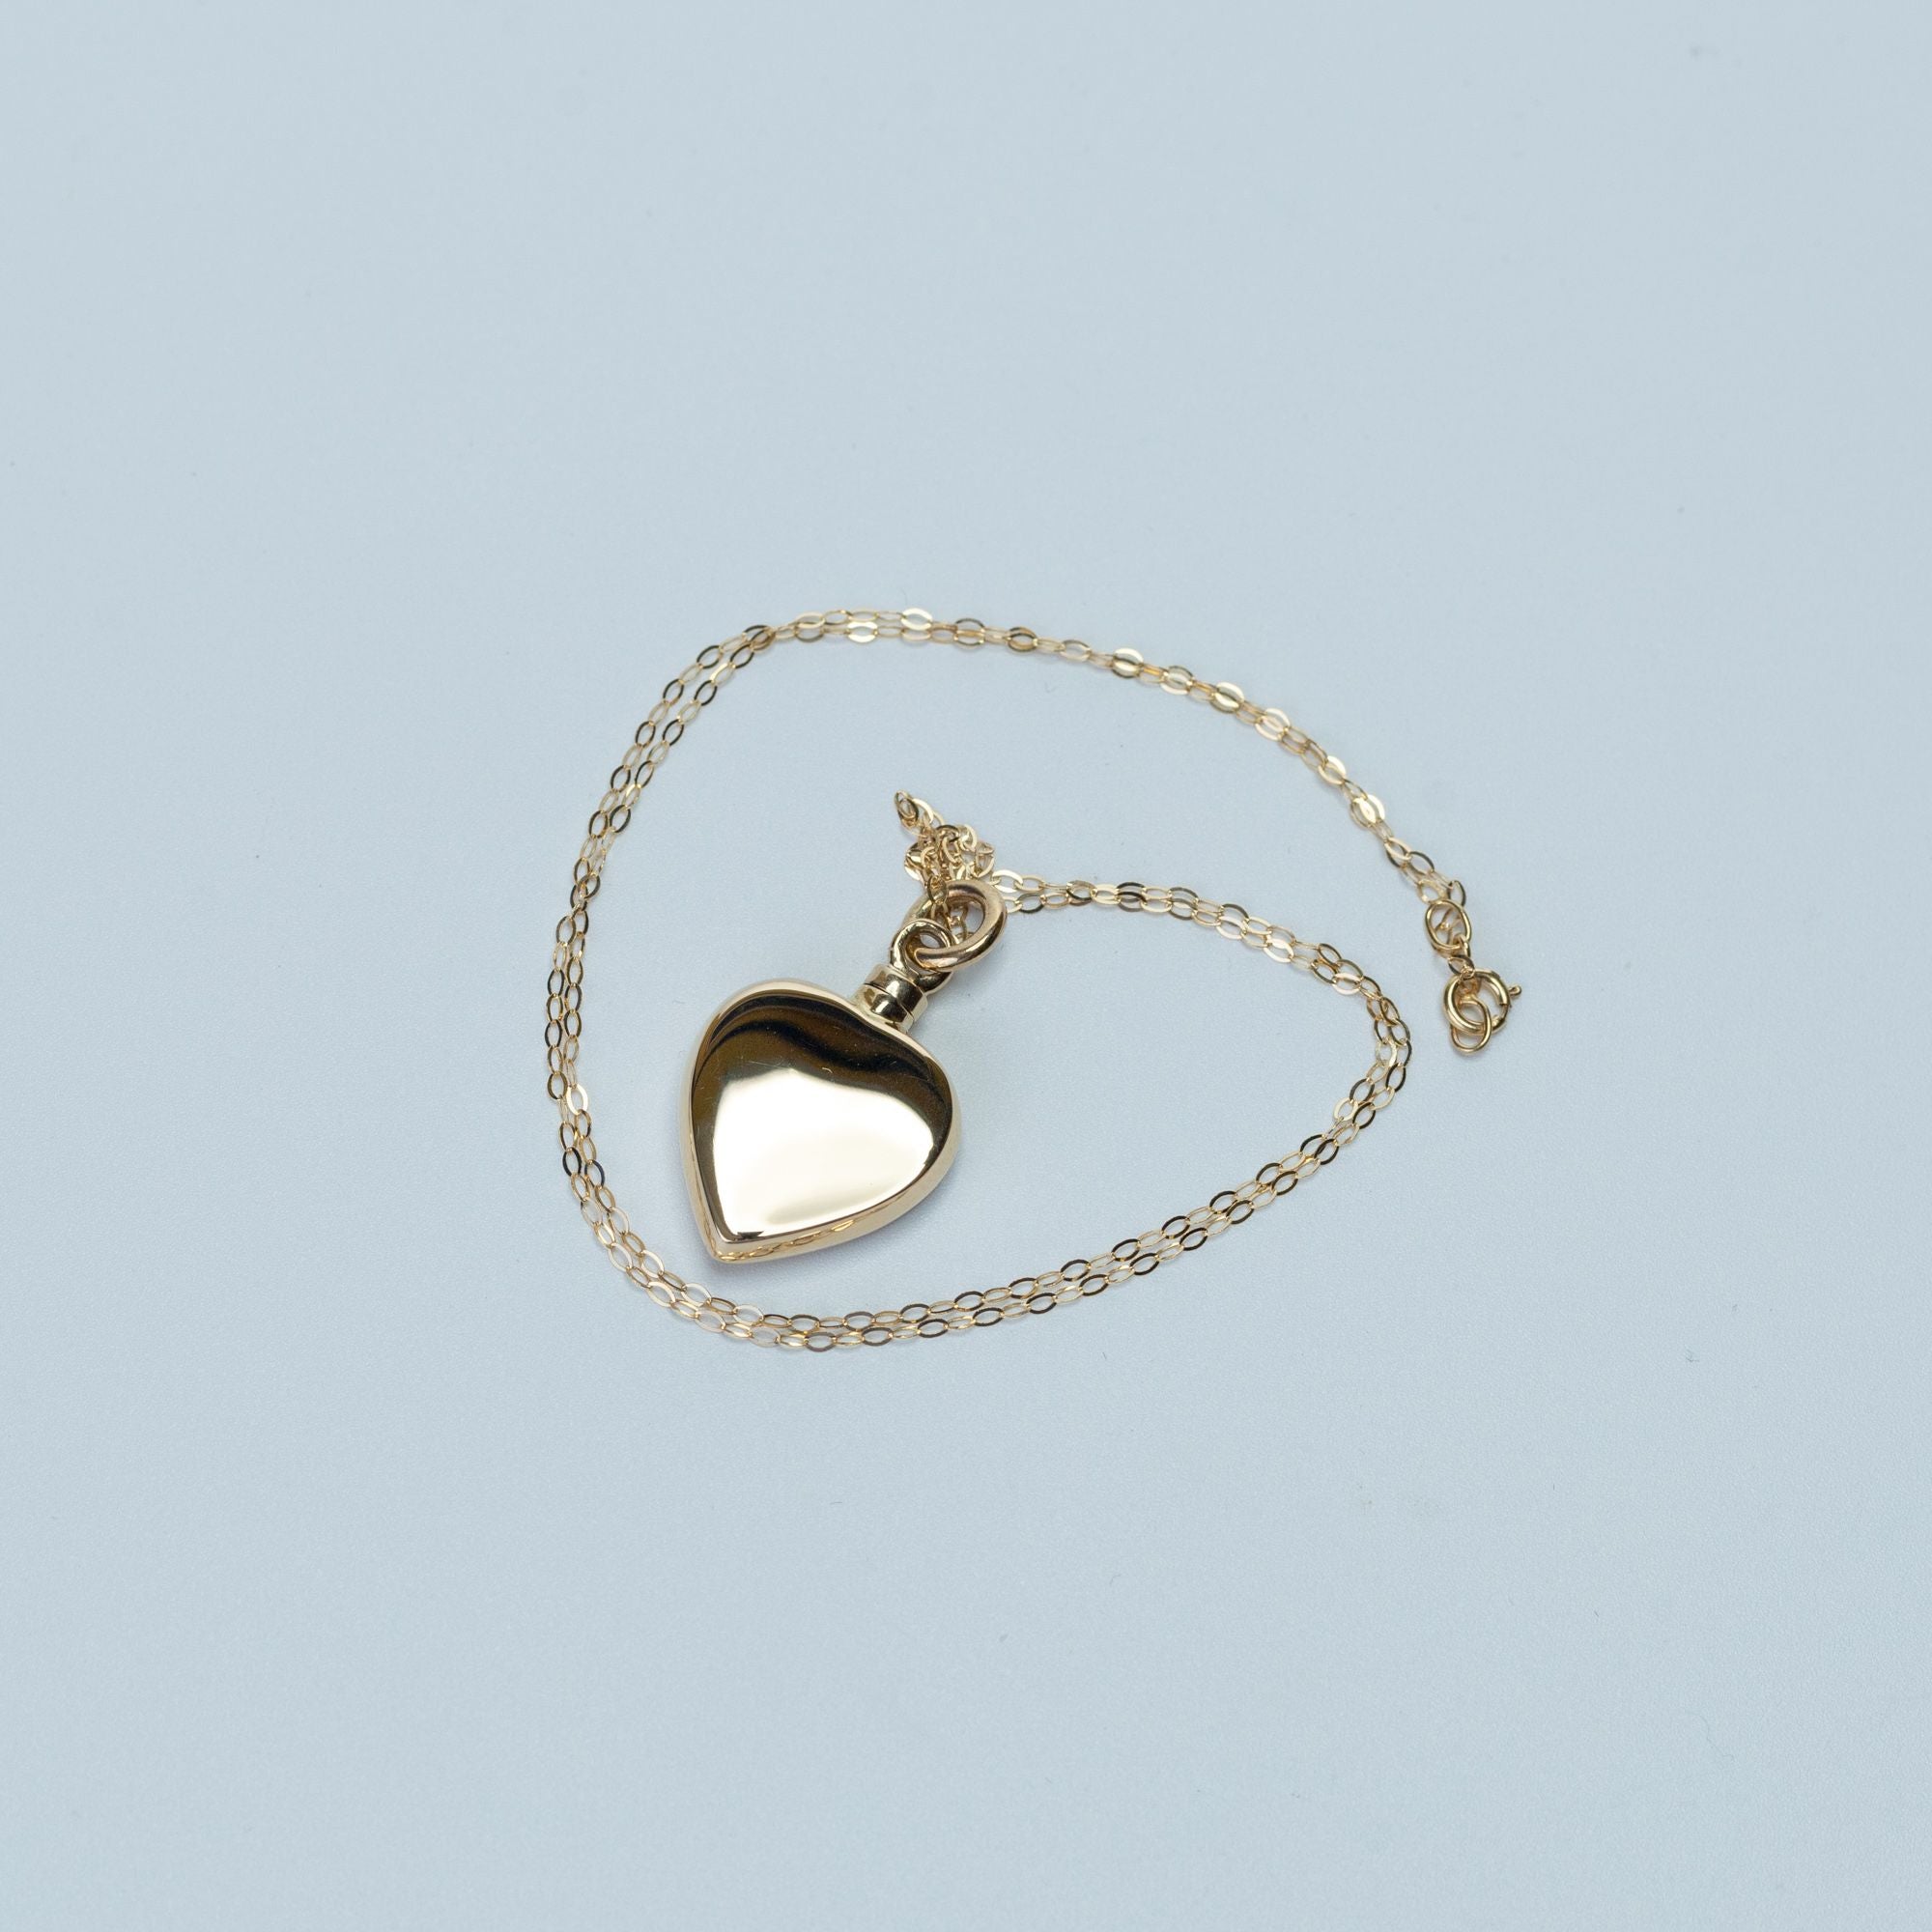 9ct Gold Heart Cremation Urn Pendant – Love to Treasure